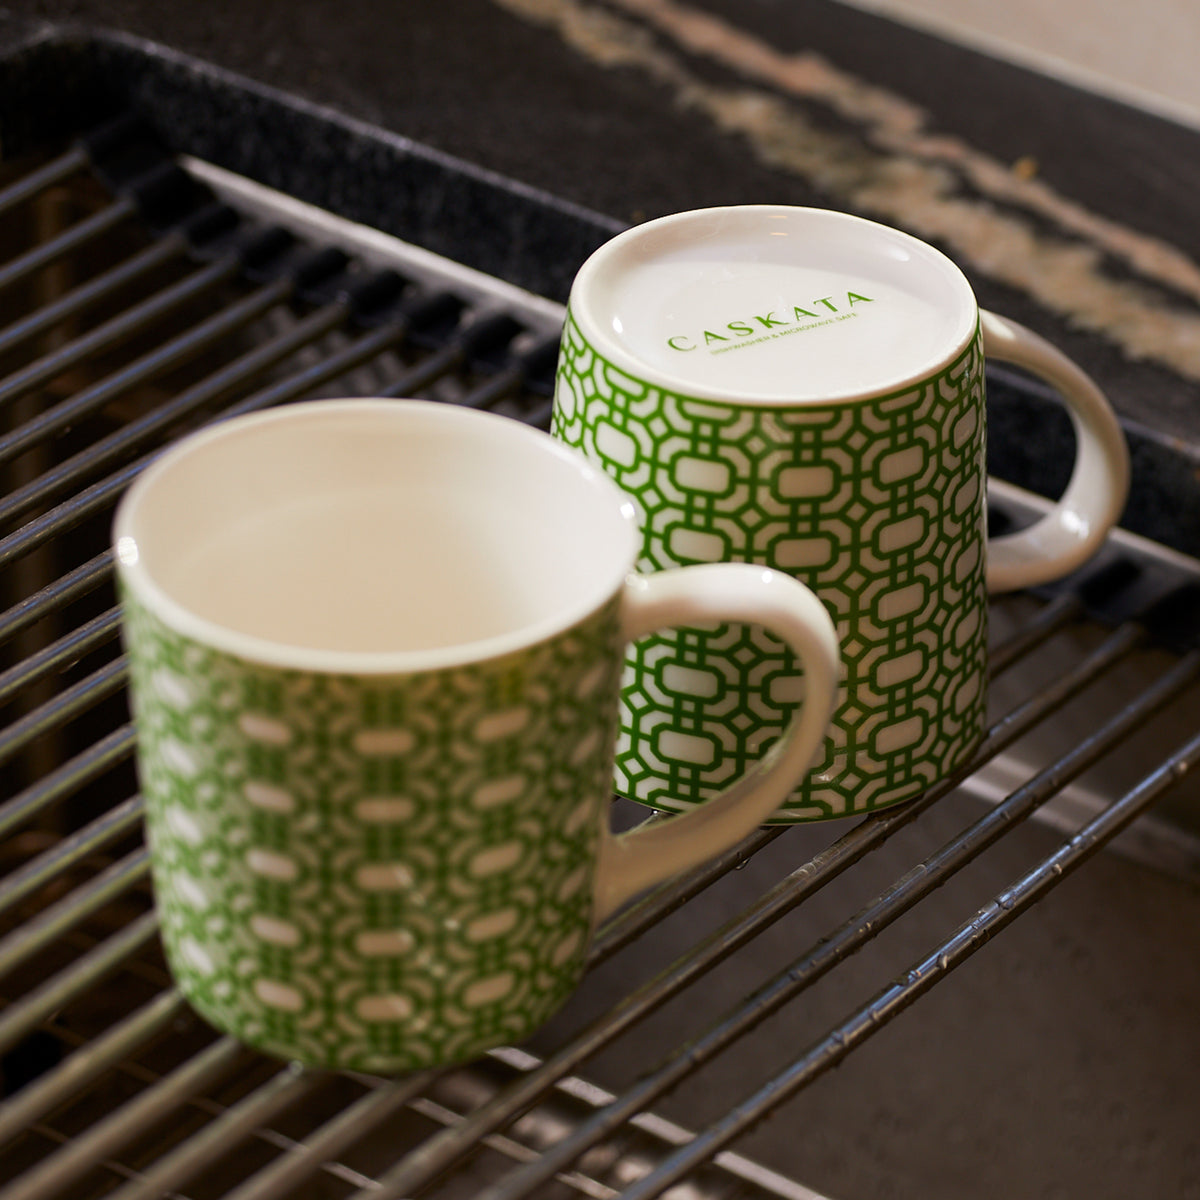 Two green and white chainlink patterned mugs, one right side up and one upside down with &quot;Caskata Artisanal Home&quot; on the base, are placed on a drying rack.